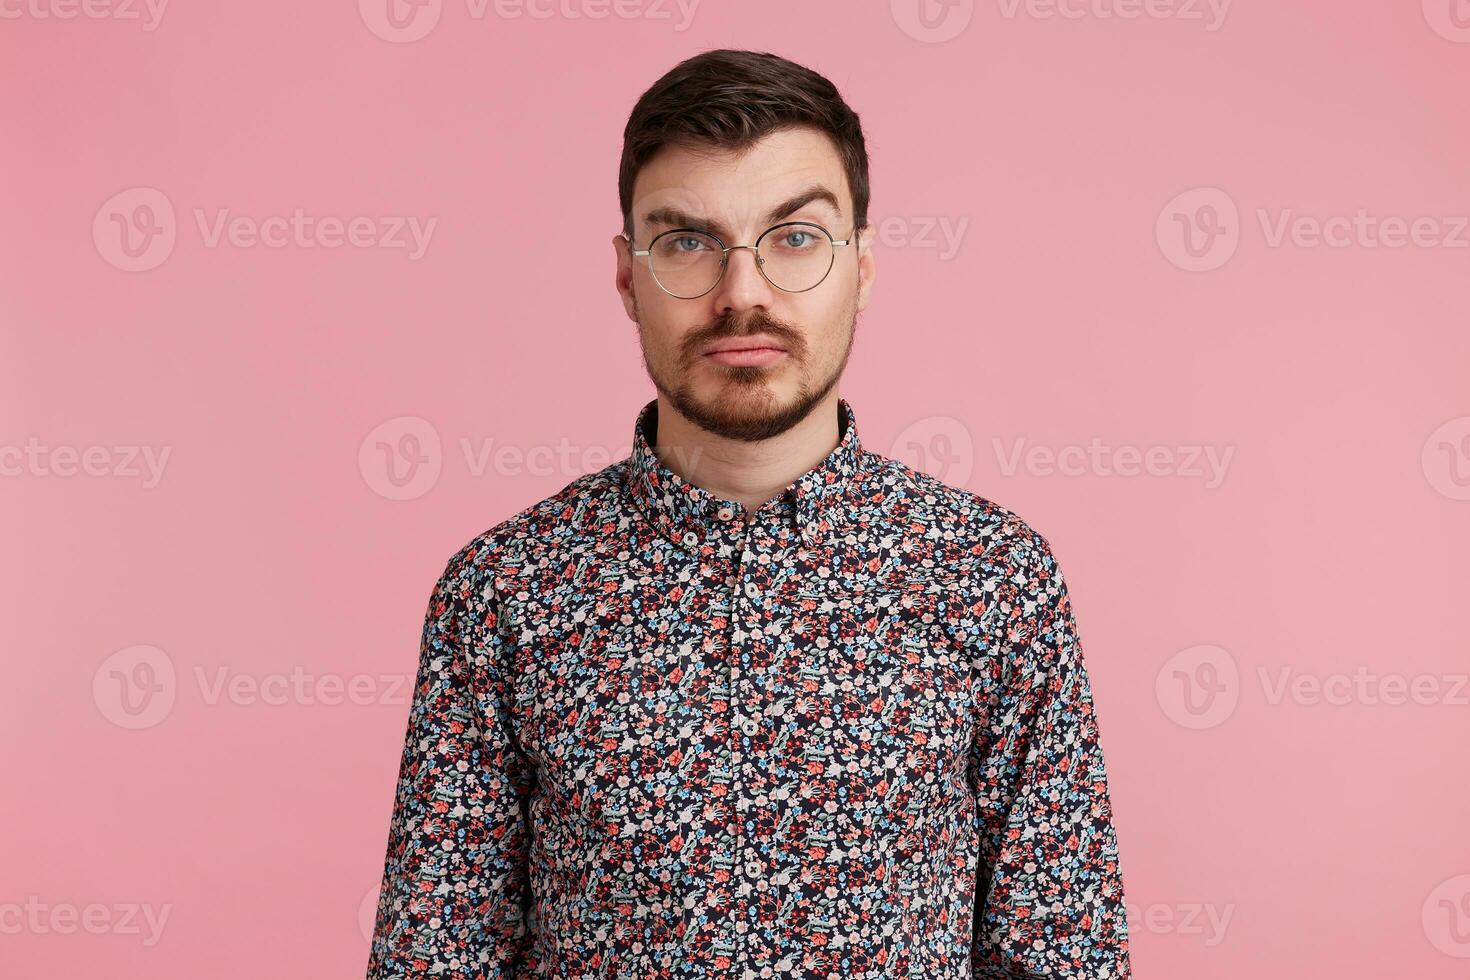 Portrait of suspicious pensive young bearded male wearing glasses in colorful shirt thinking over something, one brow raised questioning, having serious and puzzled expression over pink background photo